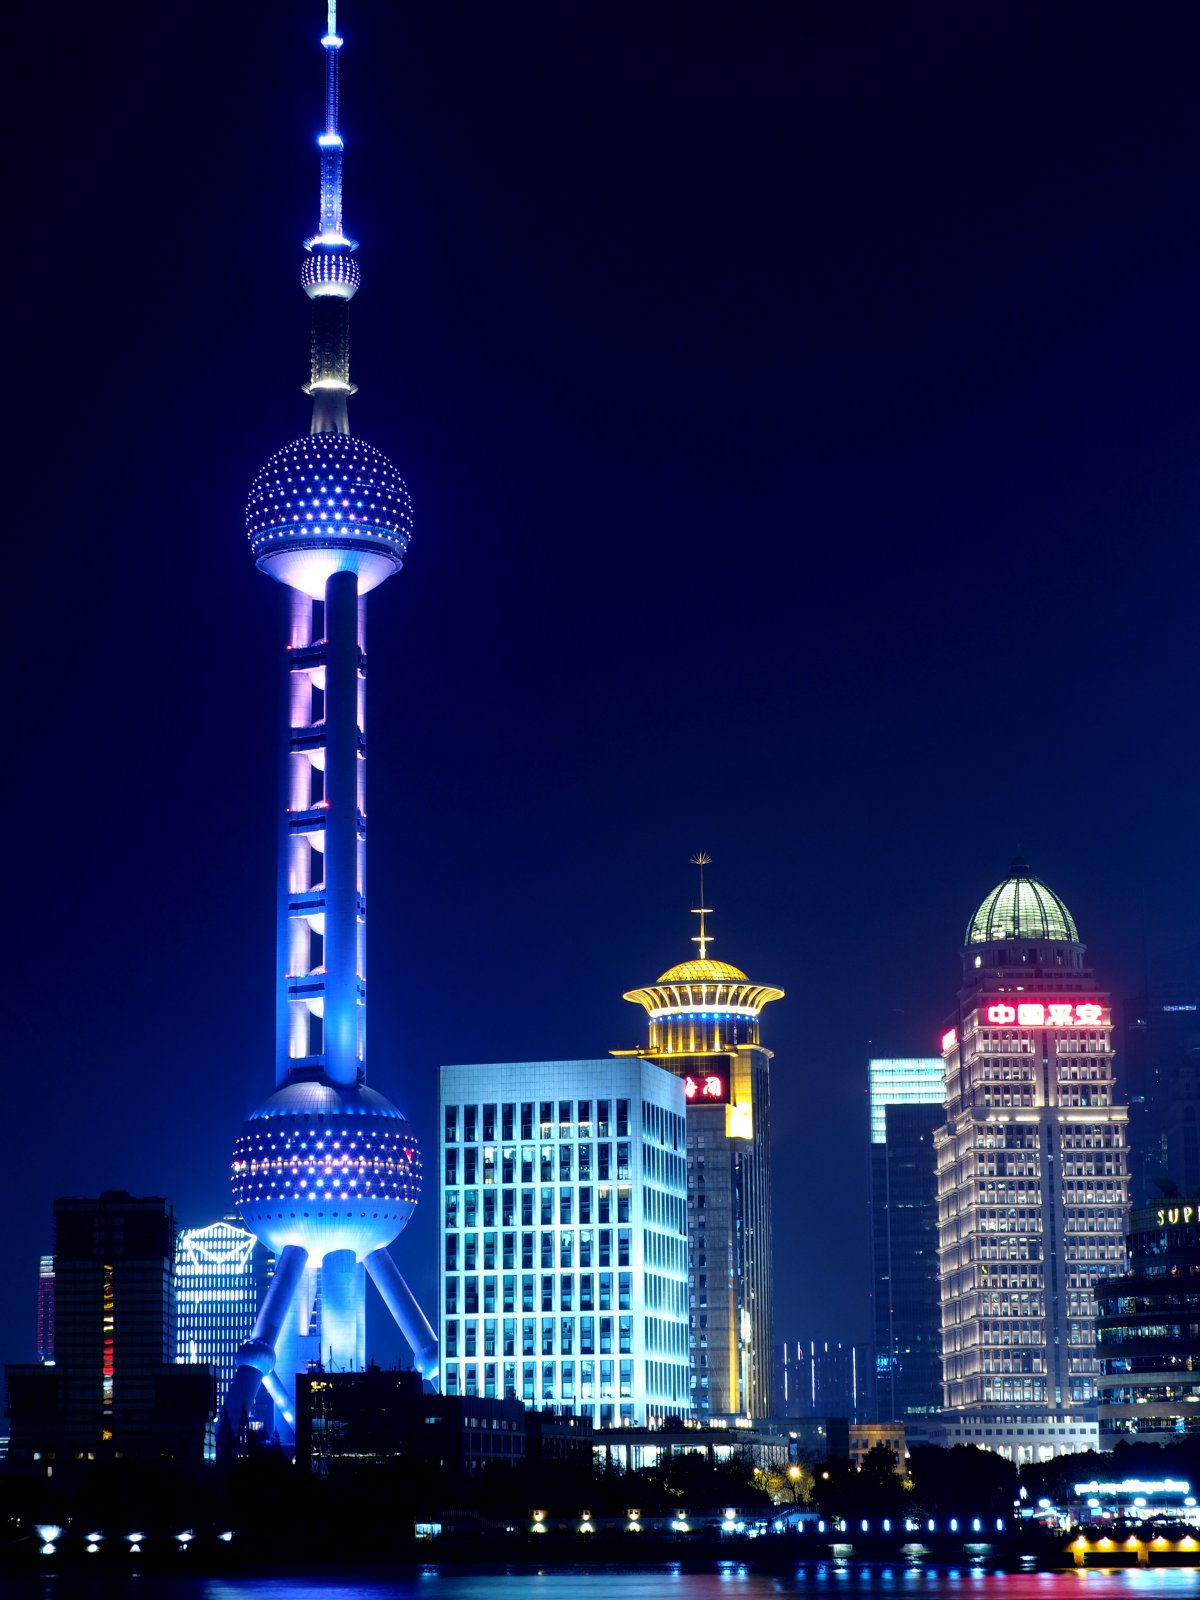 Pictures of Shanghai Oriental Pearl TV Tower at night